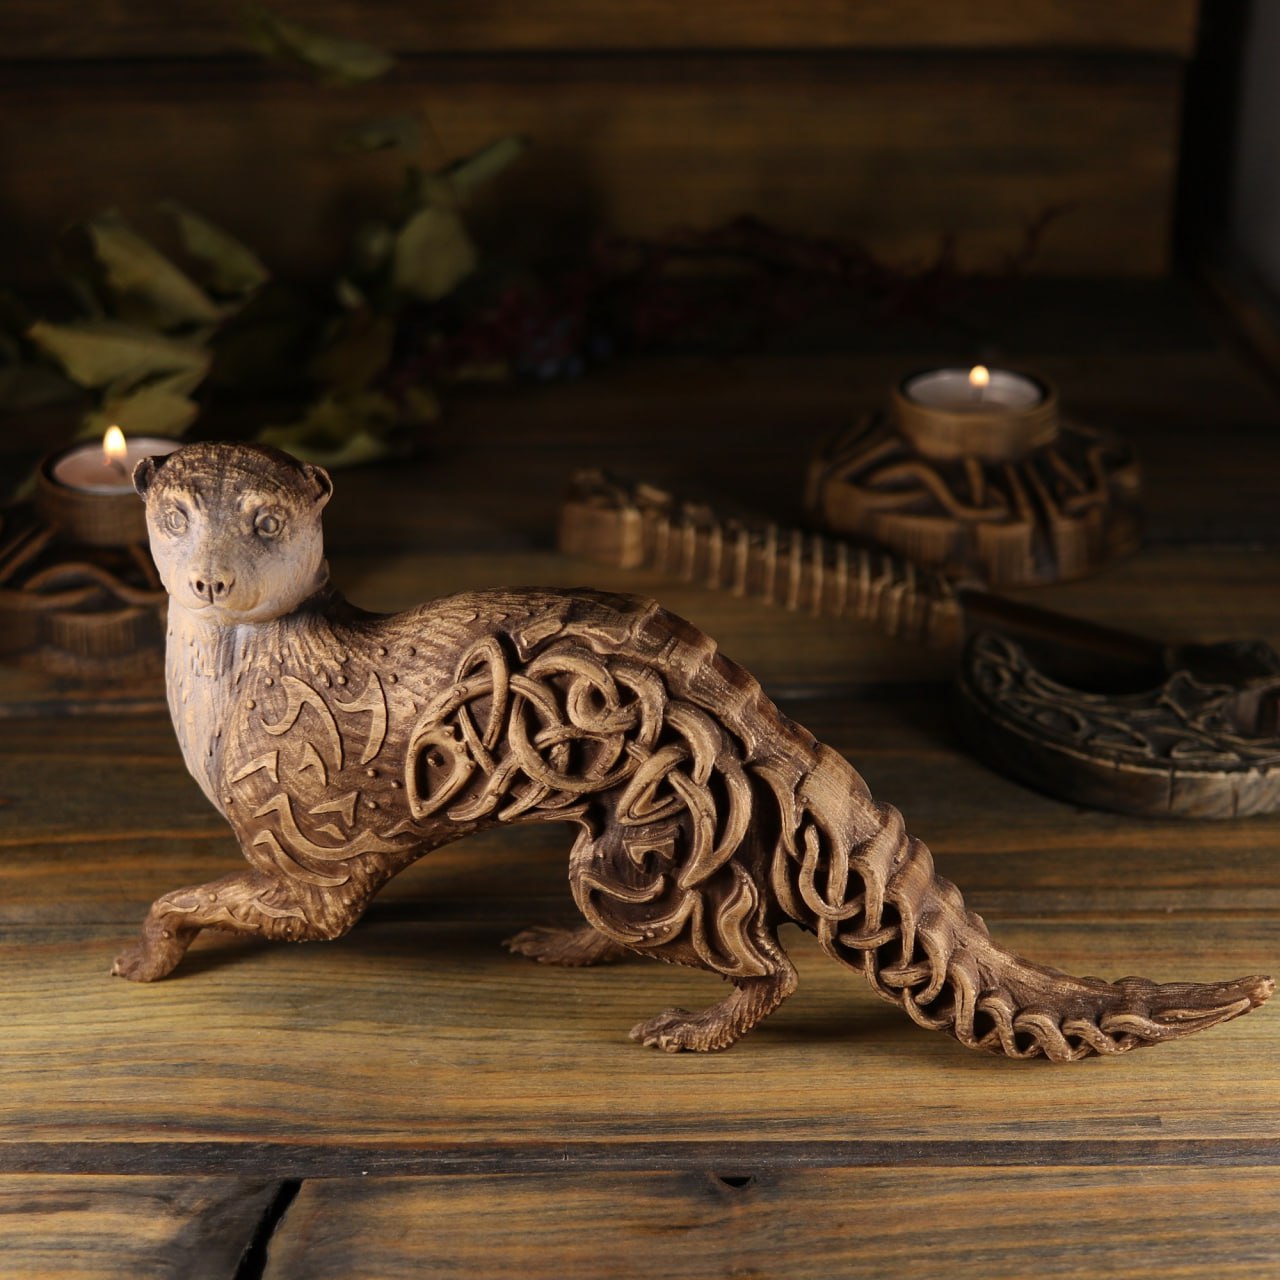 The Enchanting Wooden Otter Sculpture: A Bridge Between Celtic and Norse Mythology